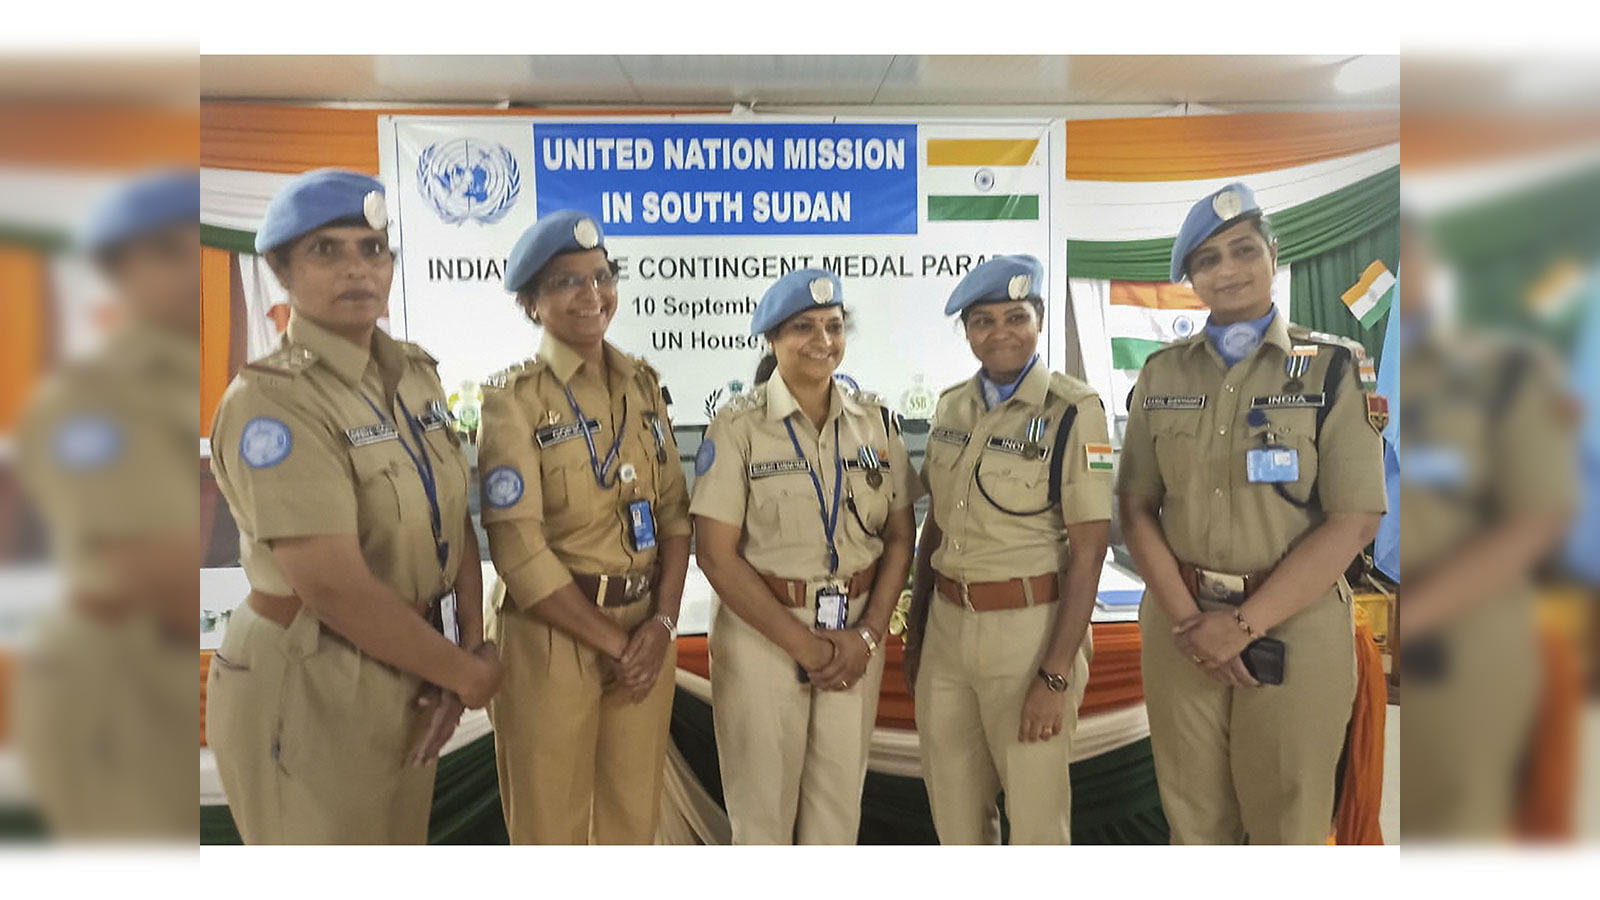 Rajsthan Police Girl Xxx - united nations: 5 Indian women police officers honoured by UN for role in  South Sudan - The Economic Times